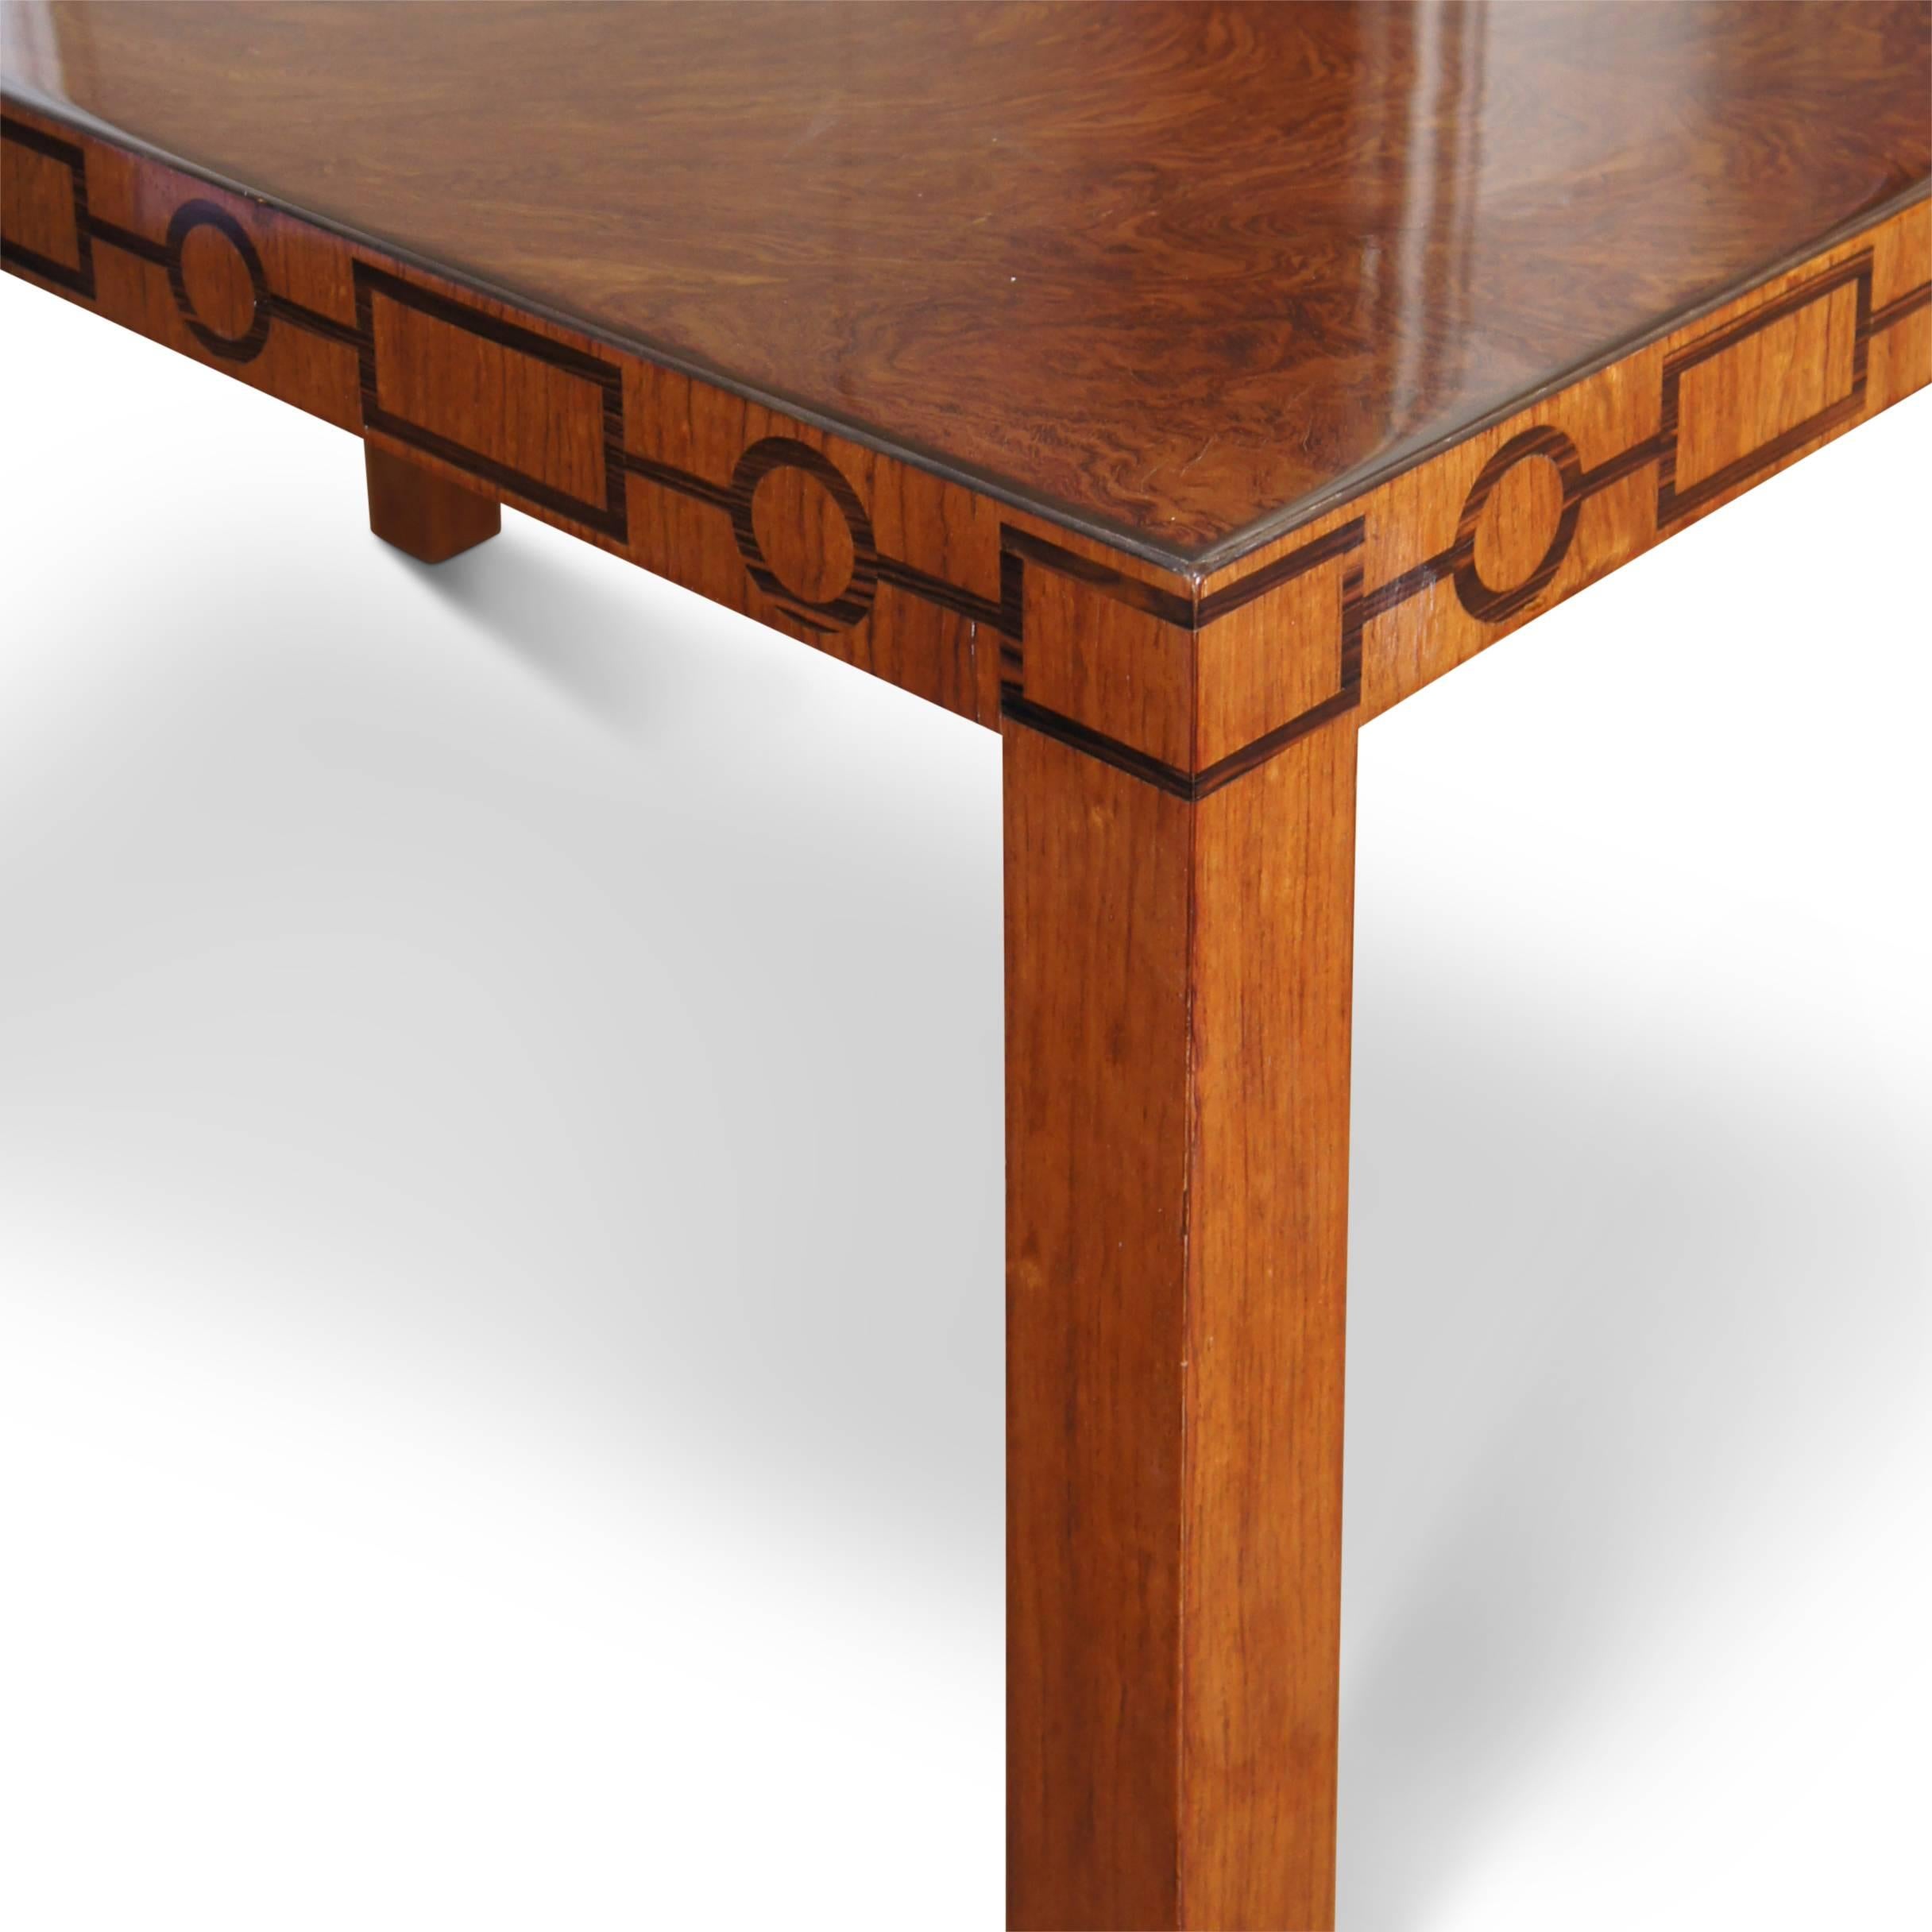 Art Deco Very Fine Swedish Modern Classicism Coffee Table with Geometric Inlay Frieze For Sale